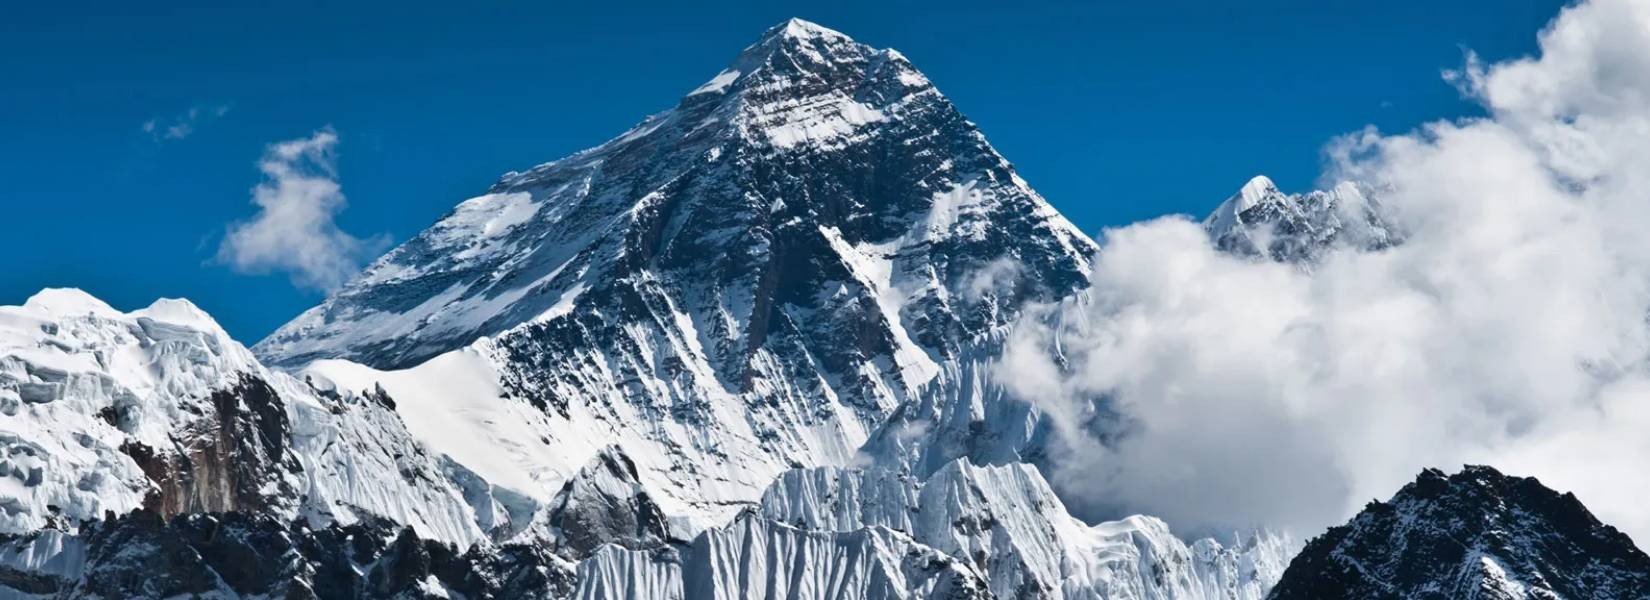 Mount Everest: Top of the World